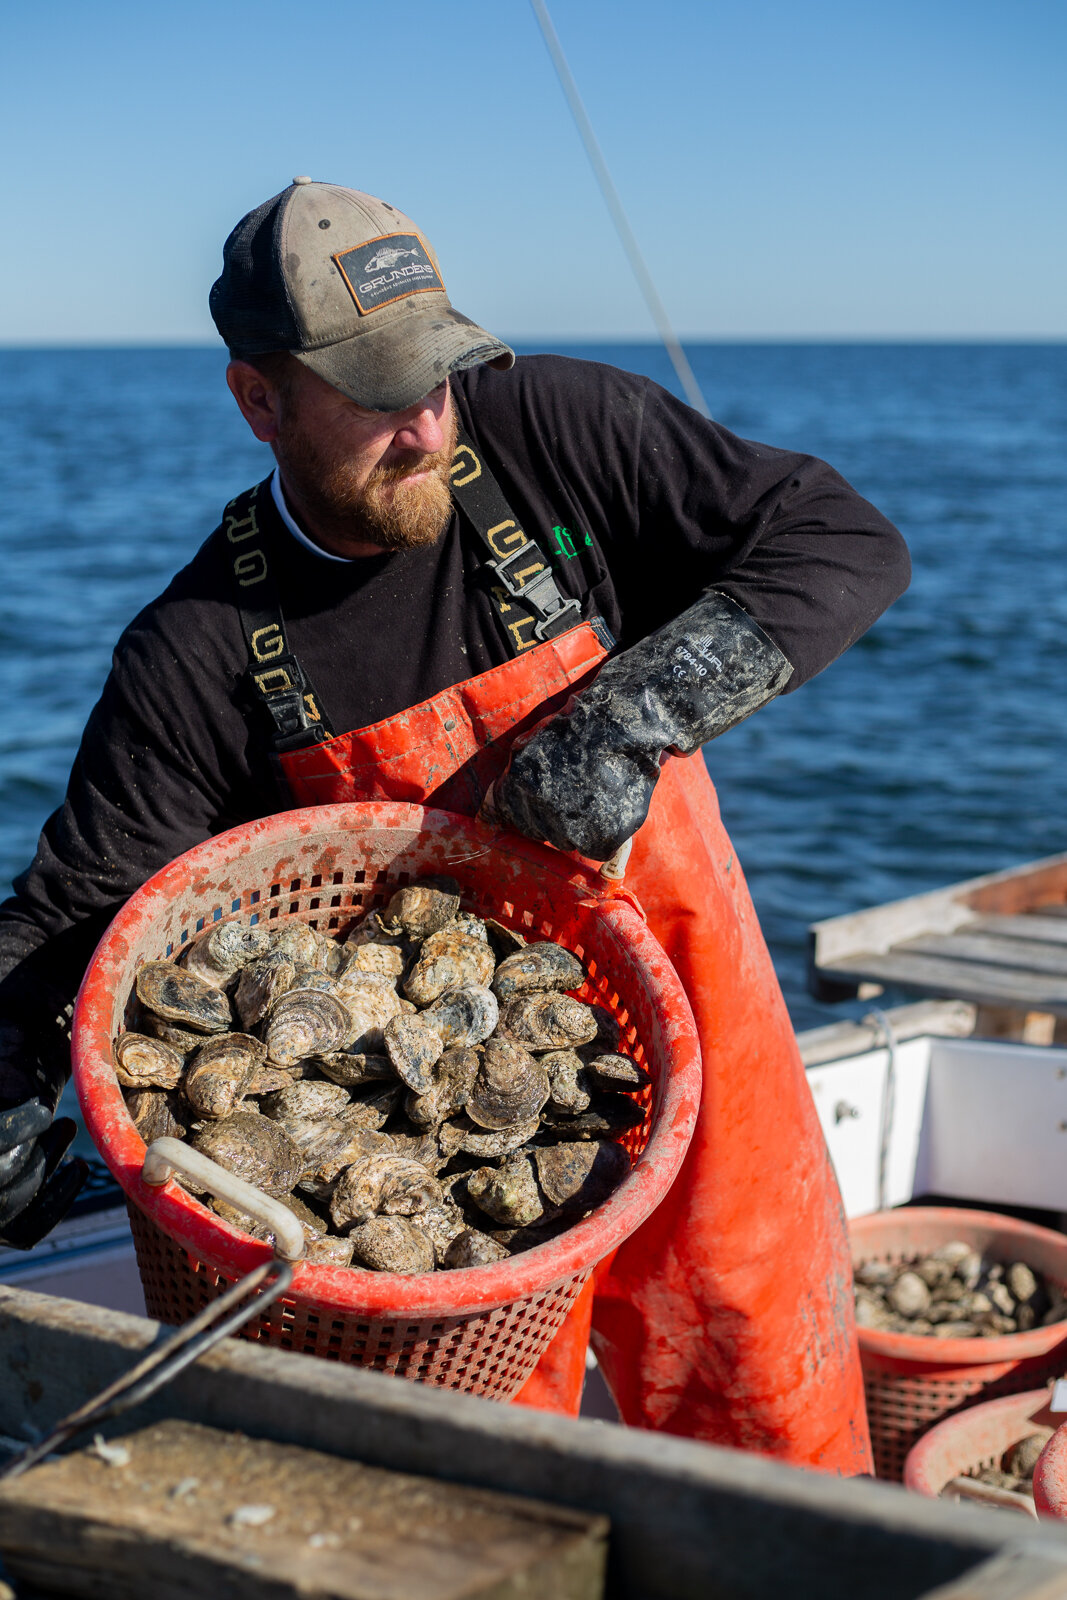  Captain Dale "Simon" Dean of Patuxent River Seafood moving a catch of oysters around his boat during a day of oystering, Wednesday, Nov. 7, 2018 in Solomon Island, MD. As a part of the Dock to Dish nonprofit program, this local waterman supplies oys